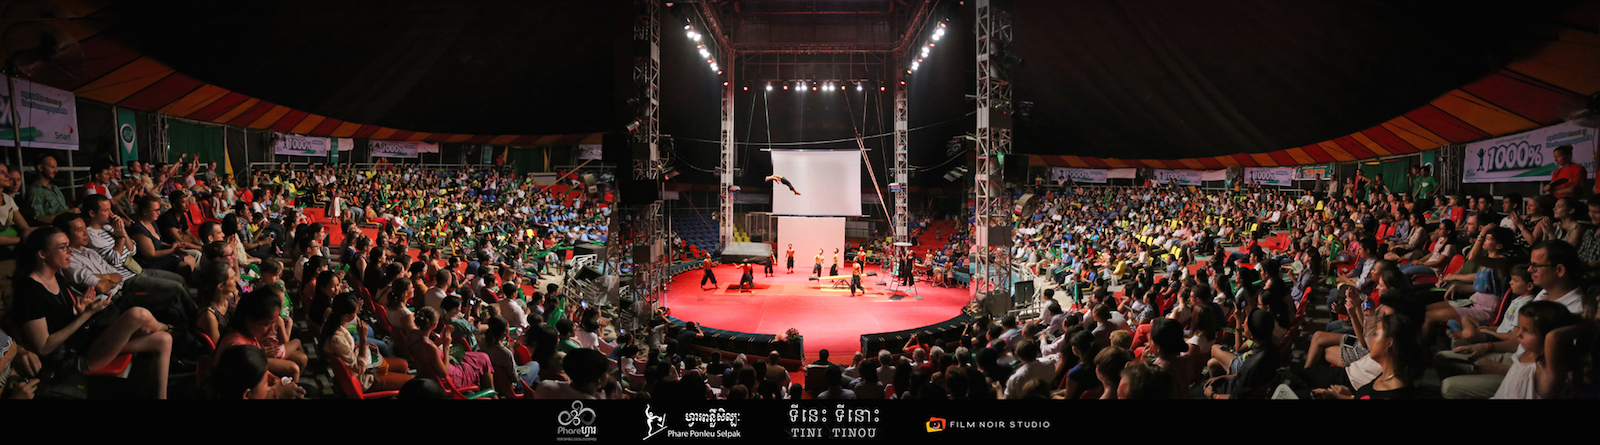 Phare, The Cambodian Circus under the BigTop in Siem Reap